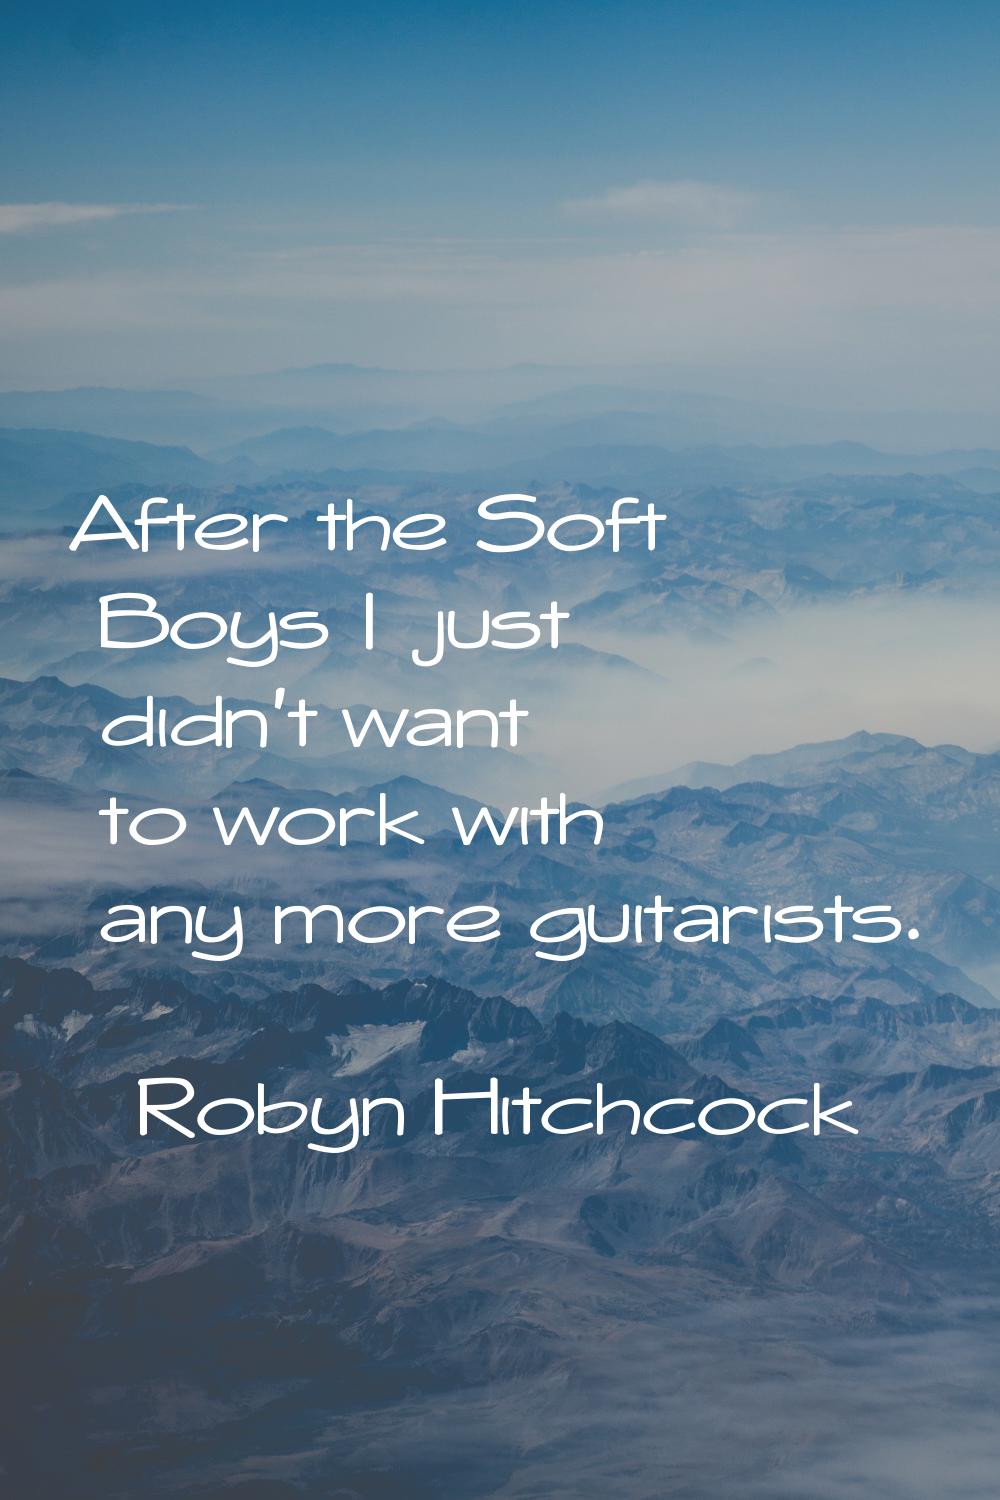 After the Soft Boys I just didn't want to work with any more guitarists.